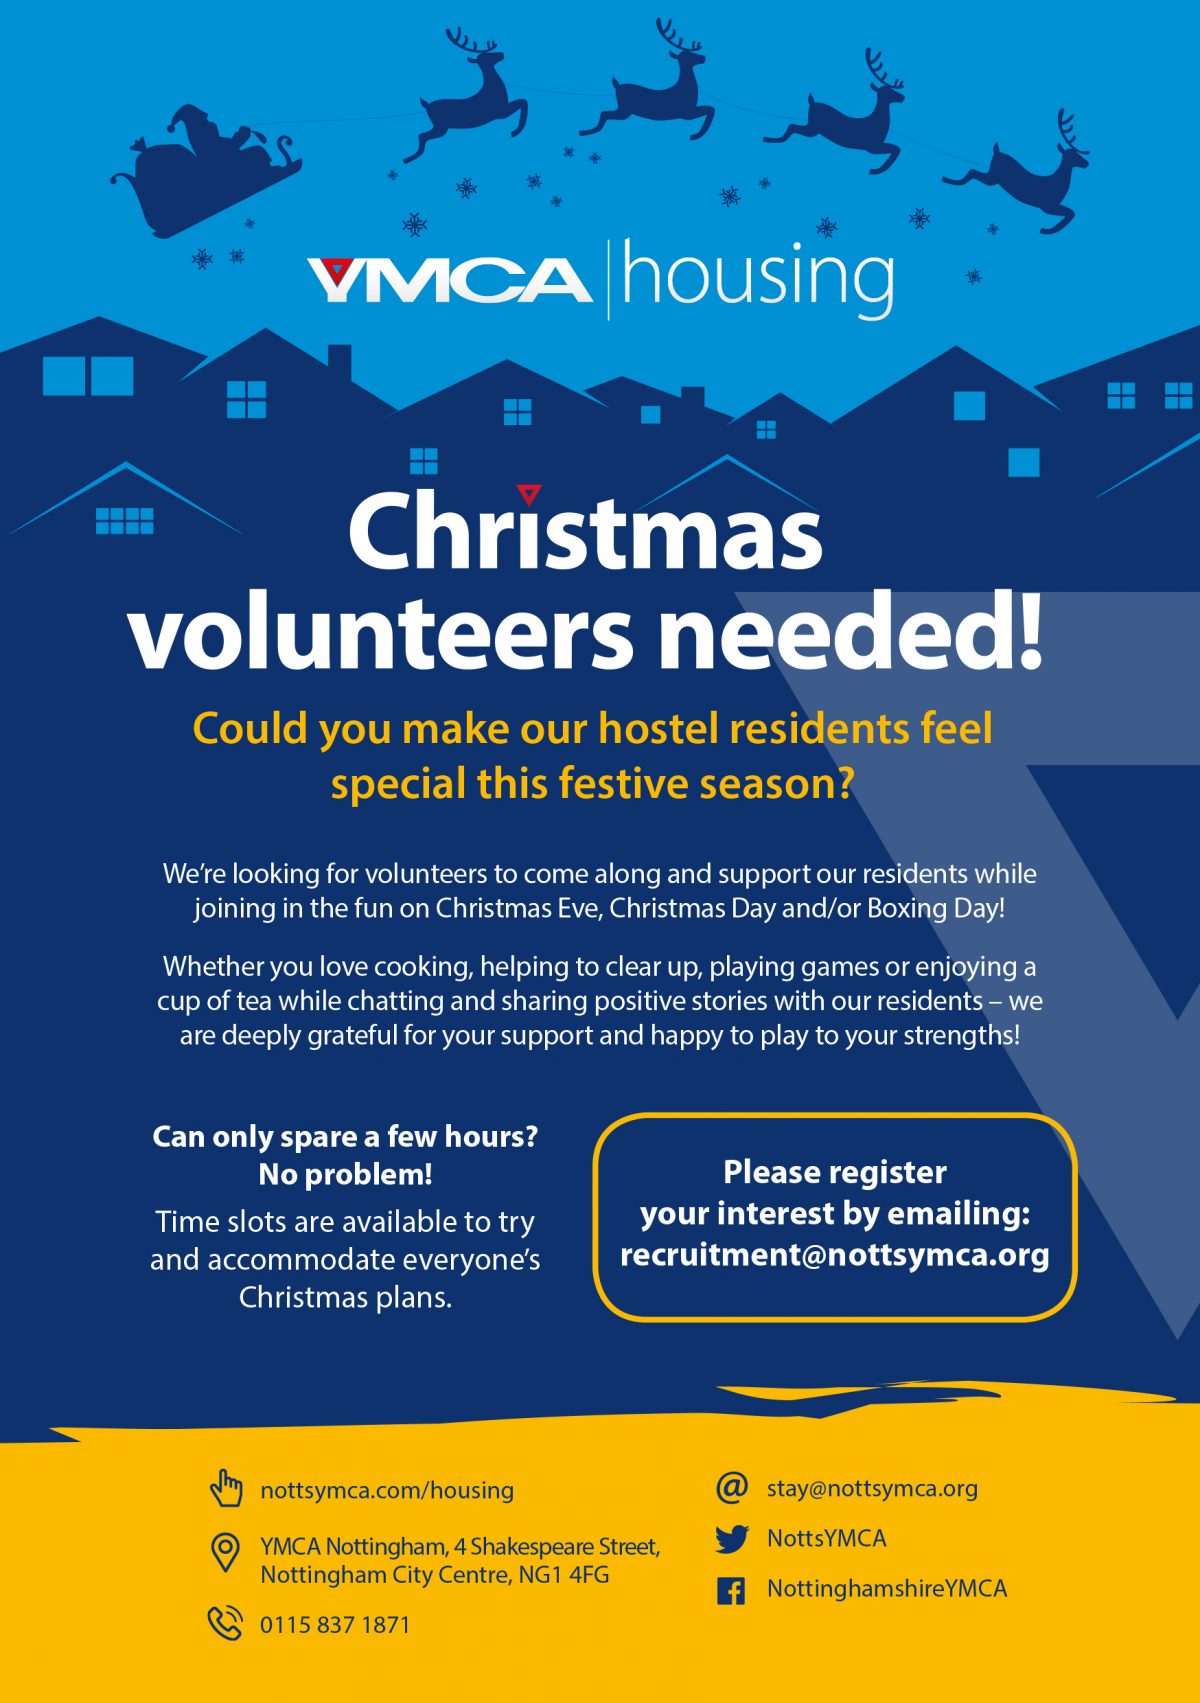 Christmas volunteers needed to support YMCA Housing residents! YMCA